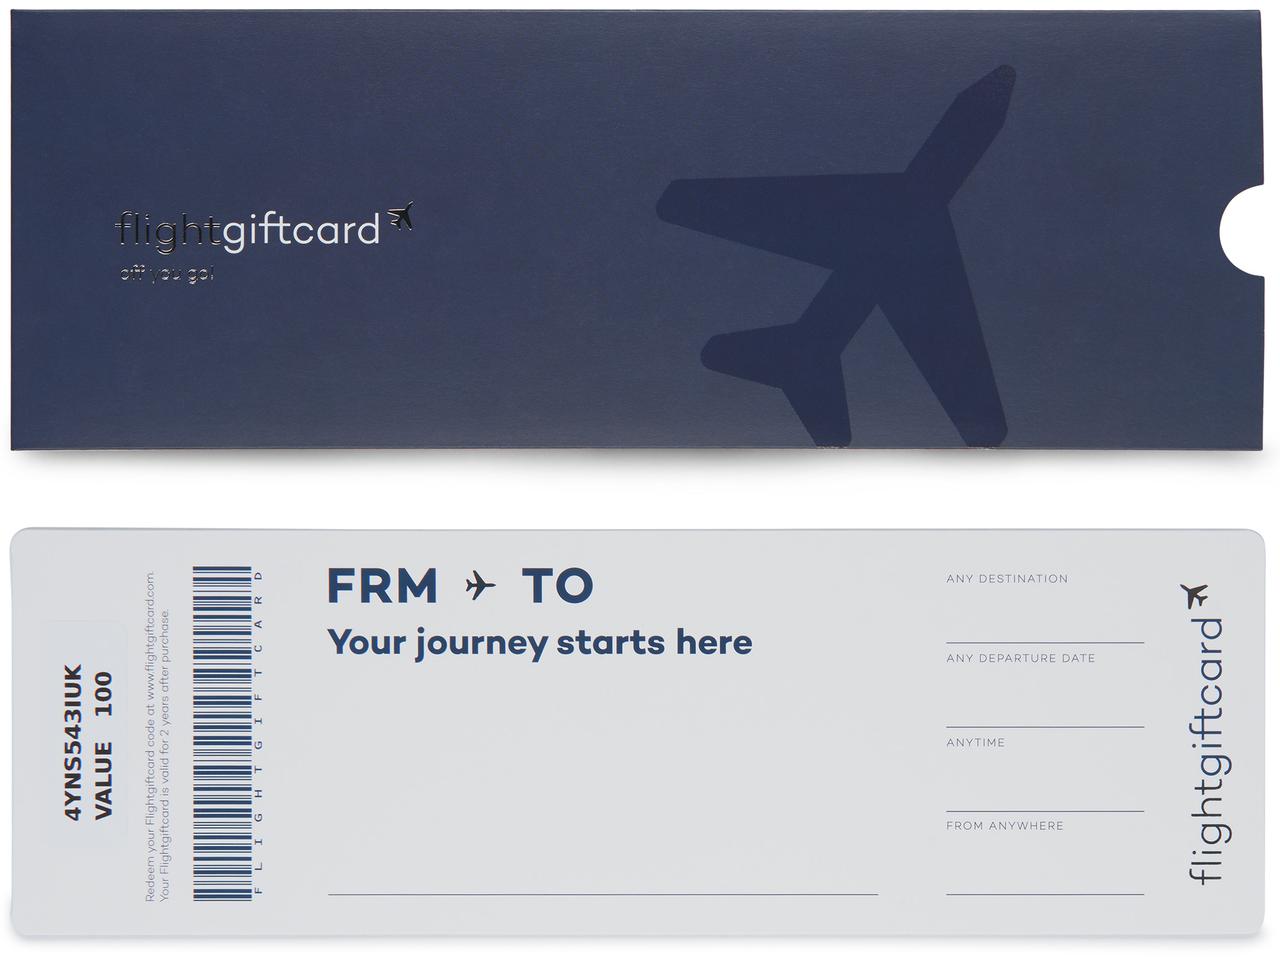 Qantas frequent flyer gift card hack Best Christmas